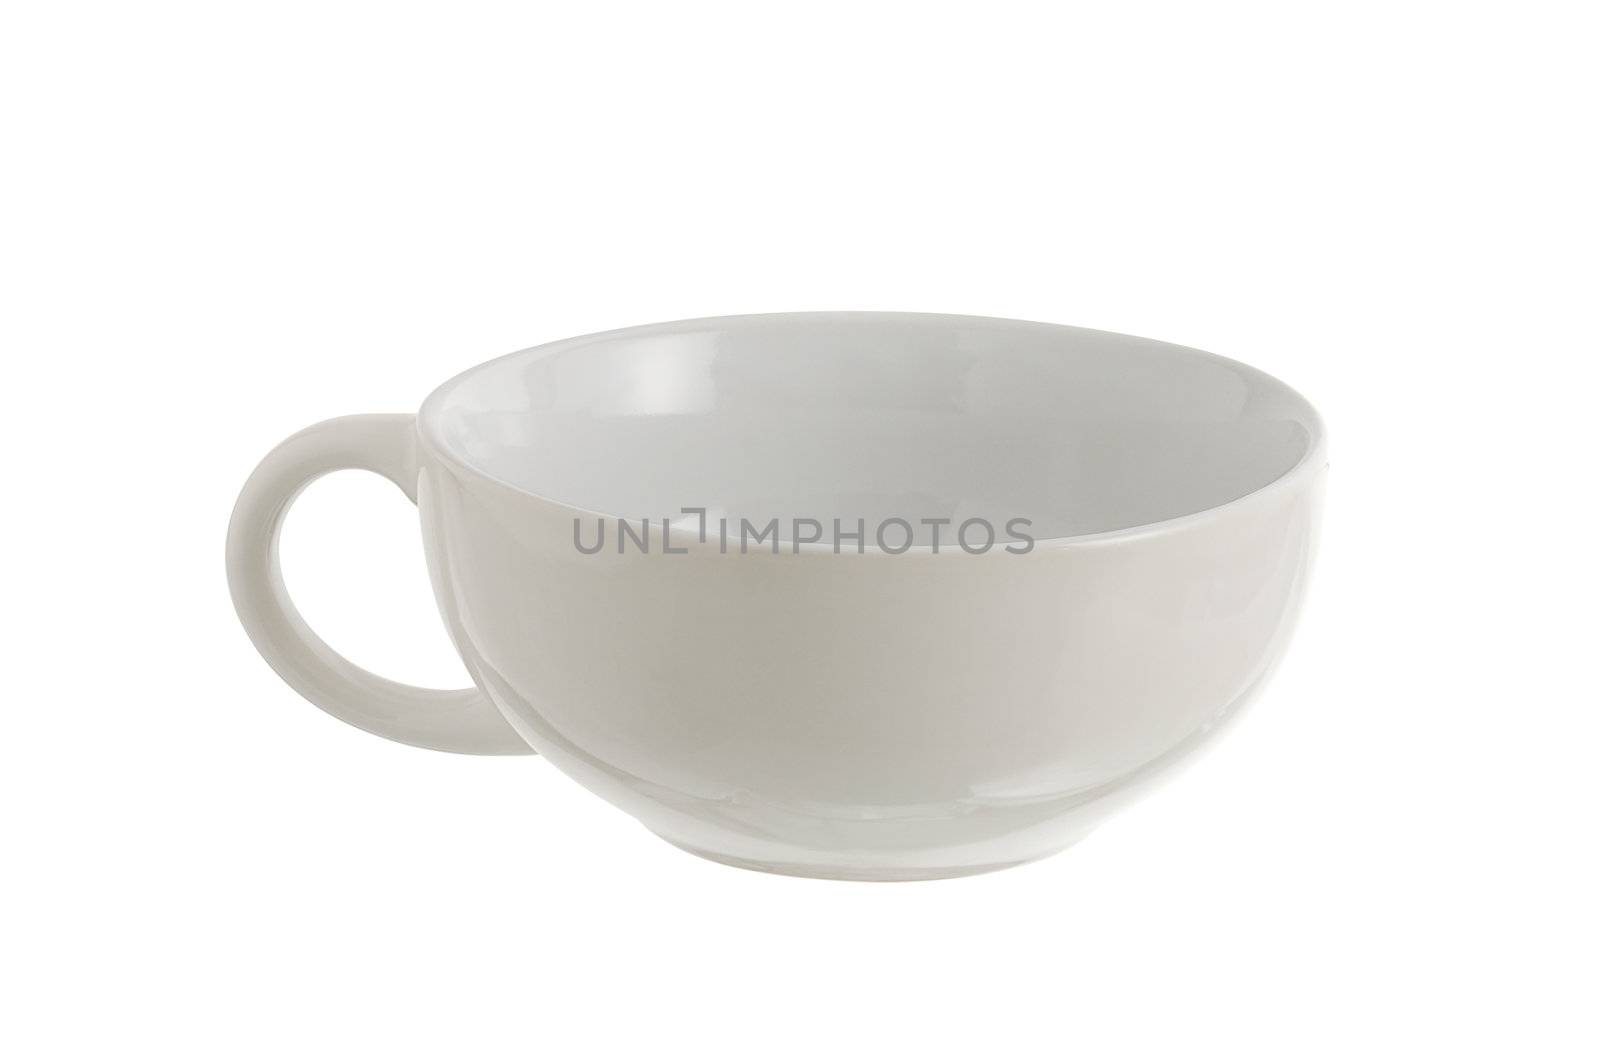 Big plain white ceramic empty soup cup isolated on white background 